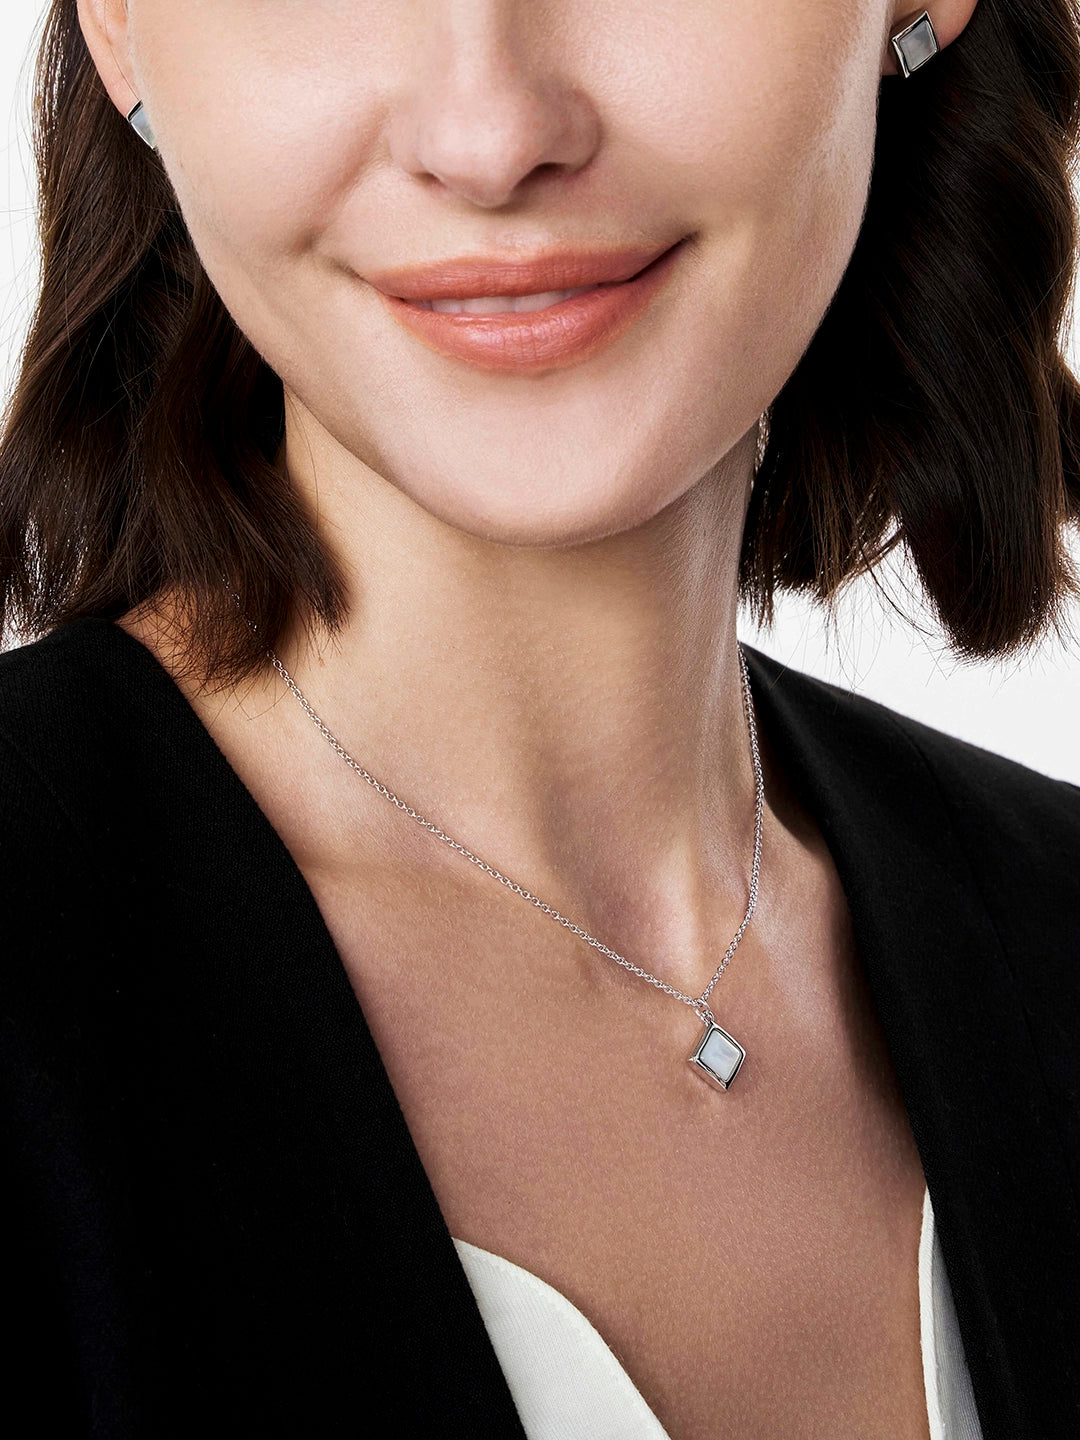 Delicate  Mother Of Pearl Pendant Necklace - OOTDY